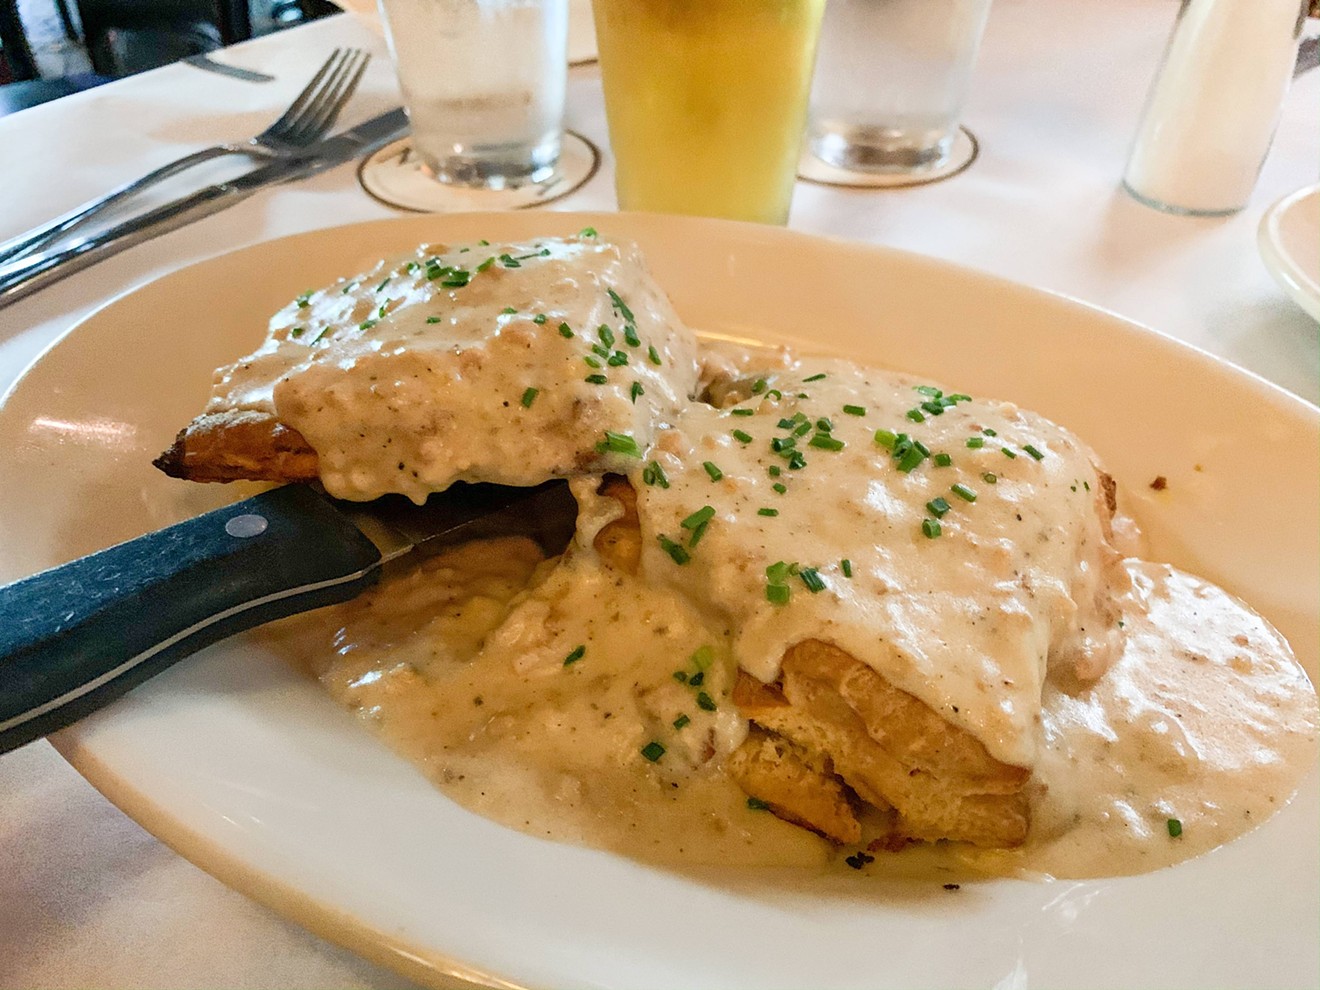 Biscuits and gravy at the Moth